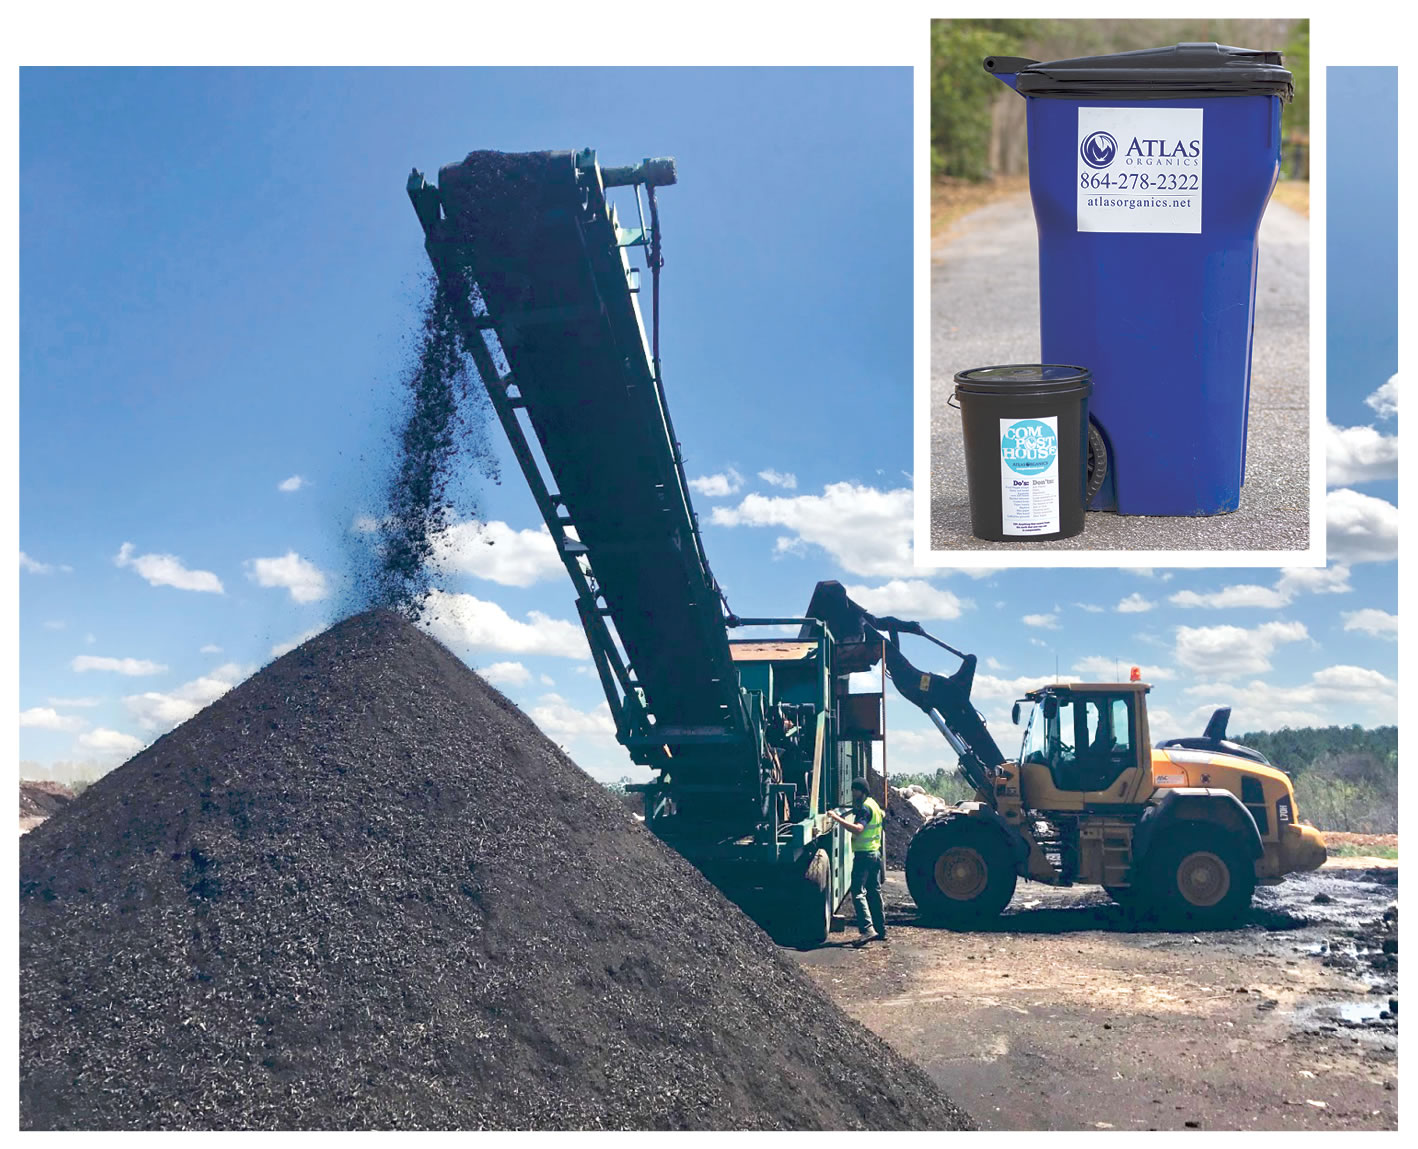 Most of Atlas Organics’ STA-certified compost is sold in bulk to area farmers. Commercial food waste clients receive 35- and 64-gallon carts; residential and small business customers utilize 5- or 13-gallon buckets as part of Atlas’ Compost House collection program (inset).